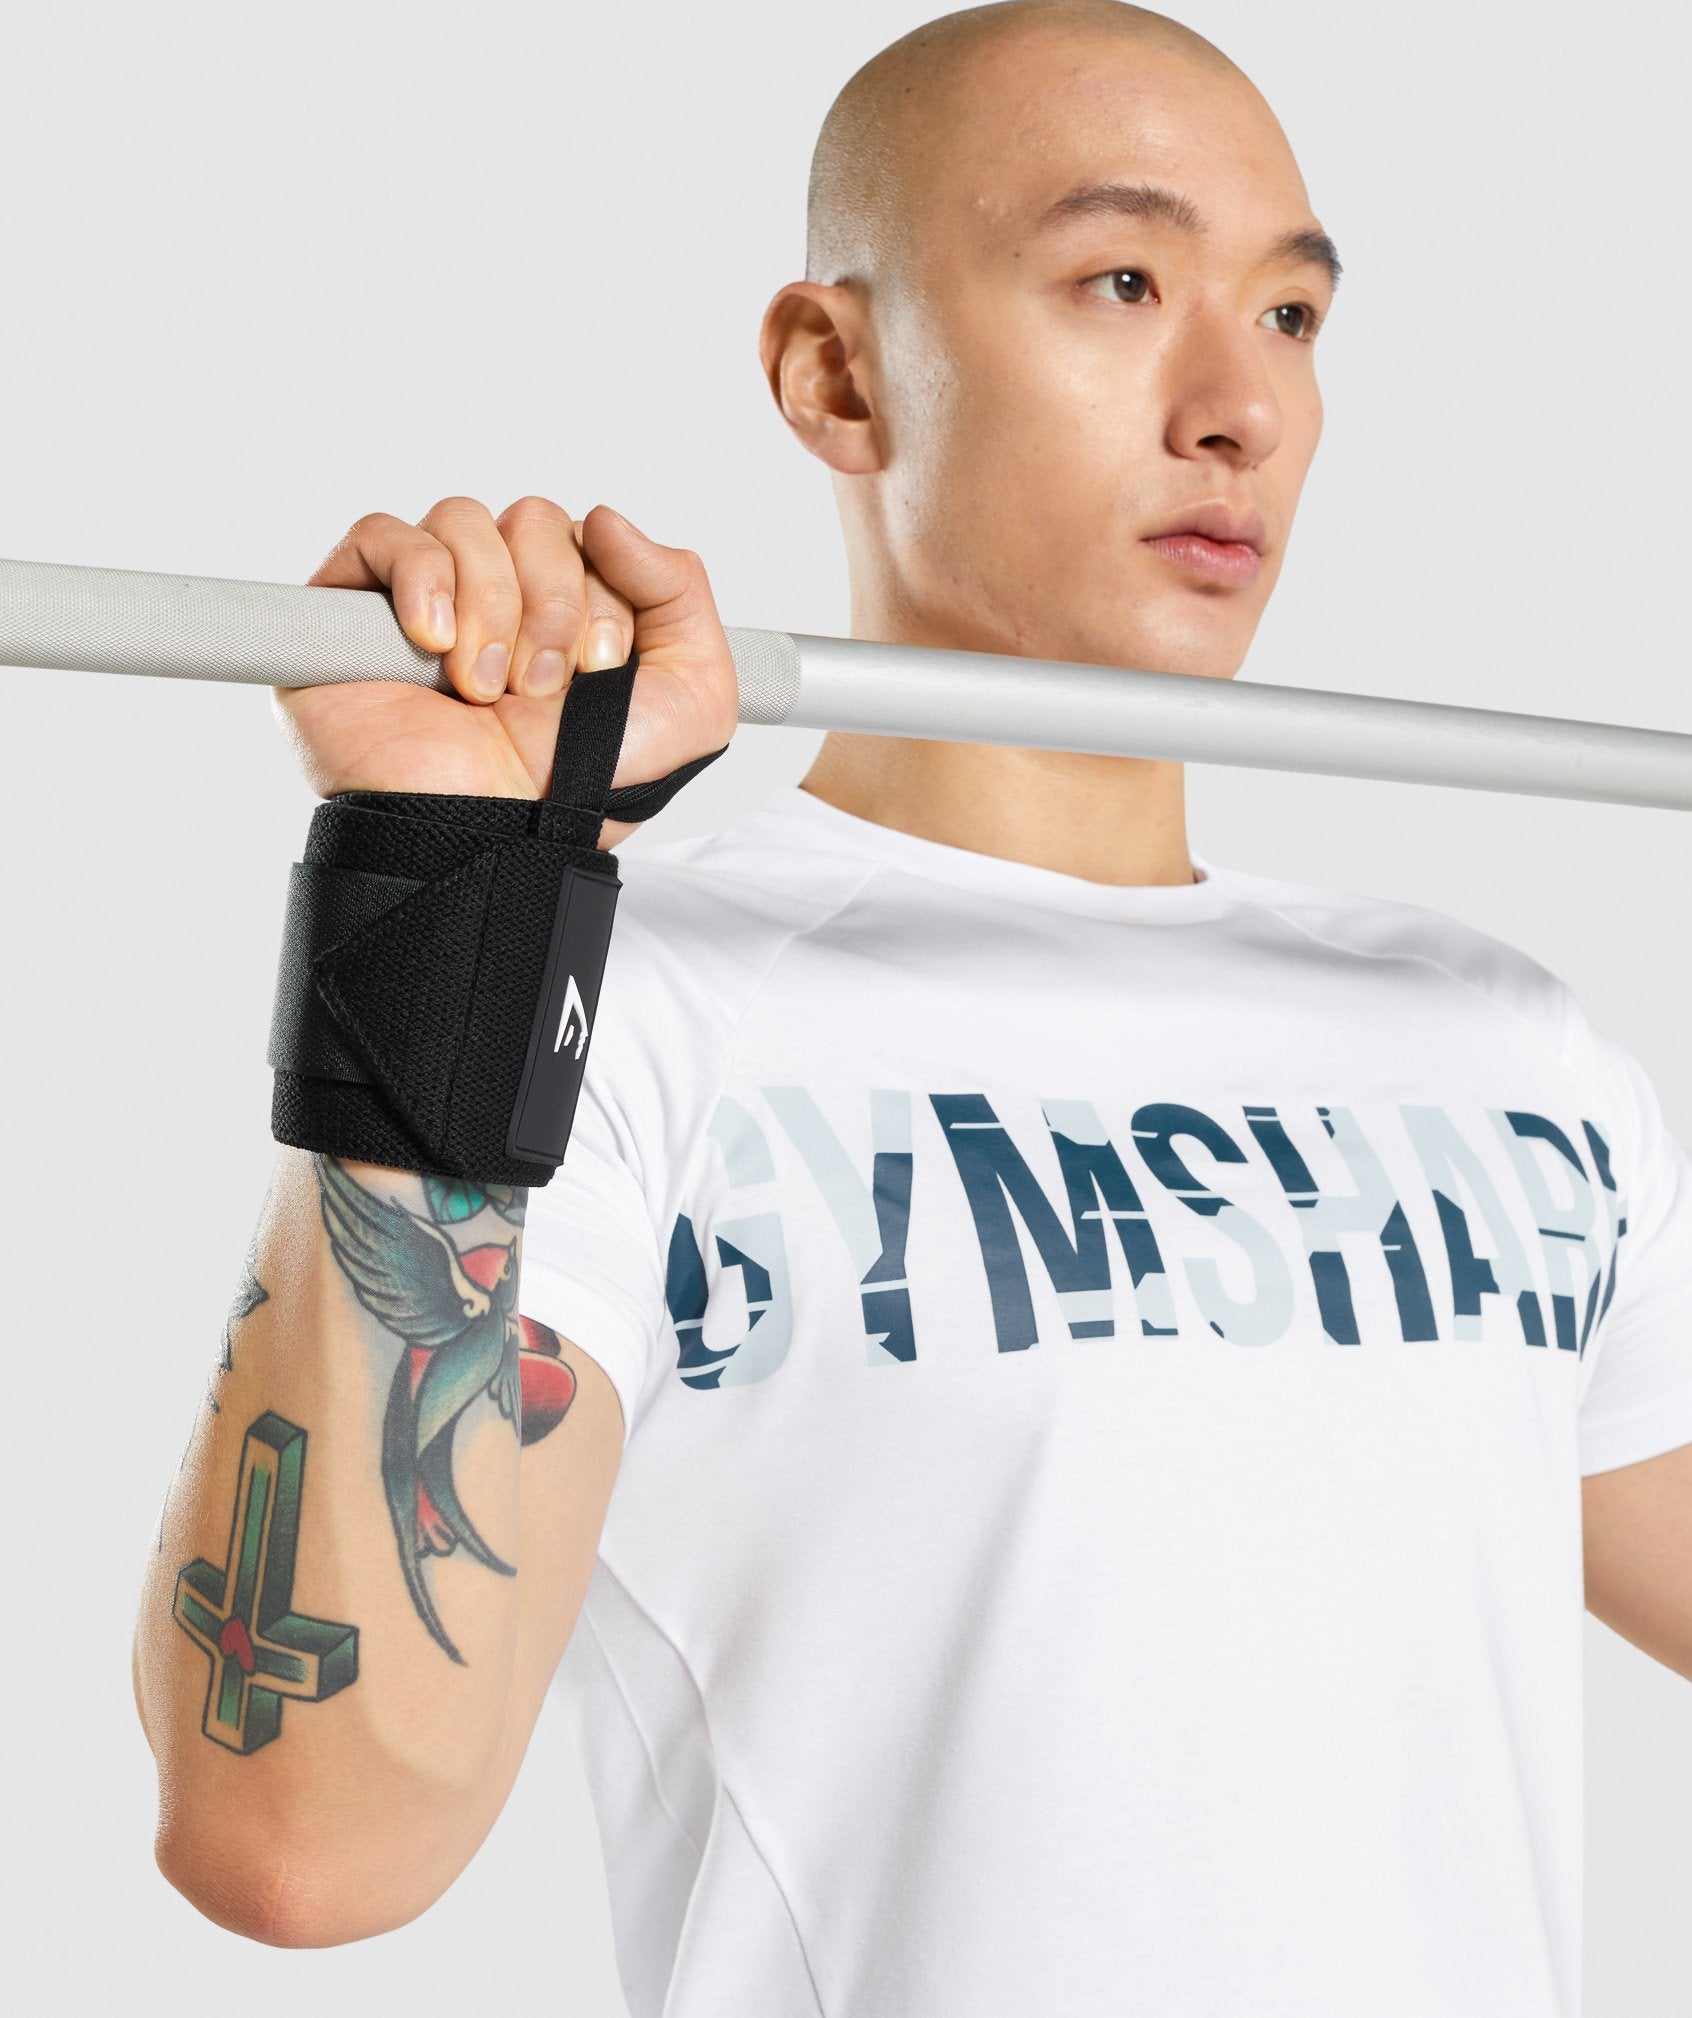 gymshark down to the wrist wraps > countdown is ON to lift